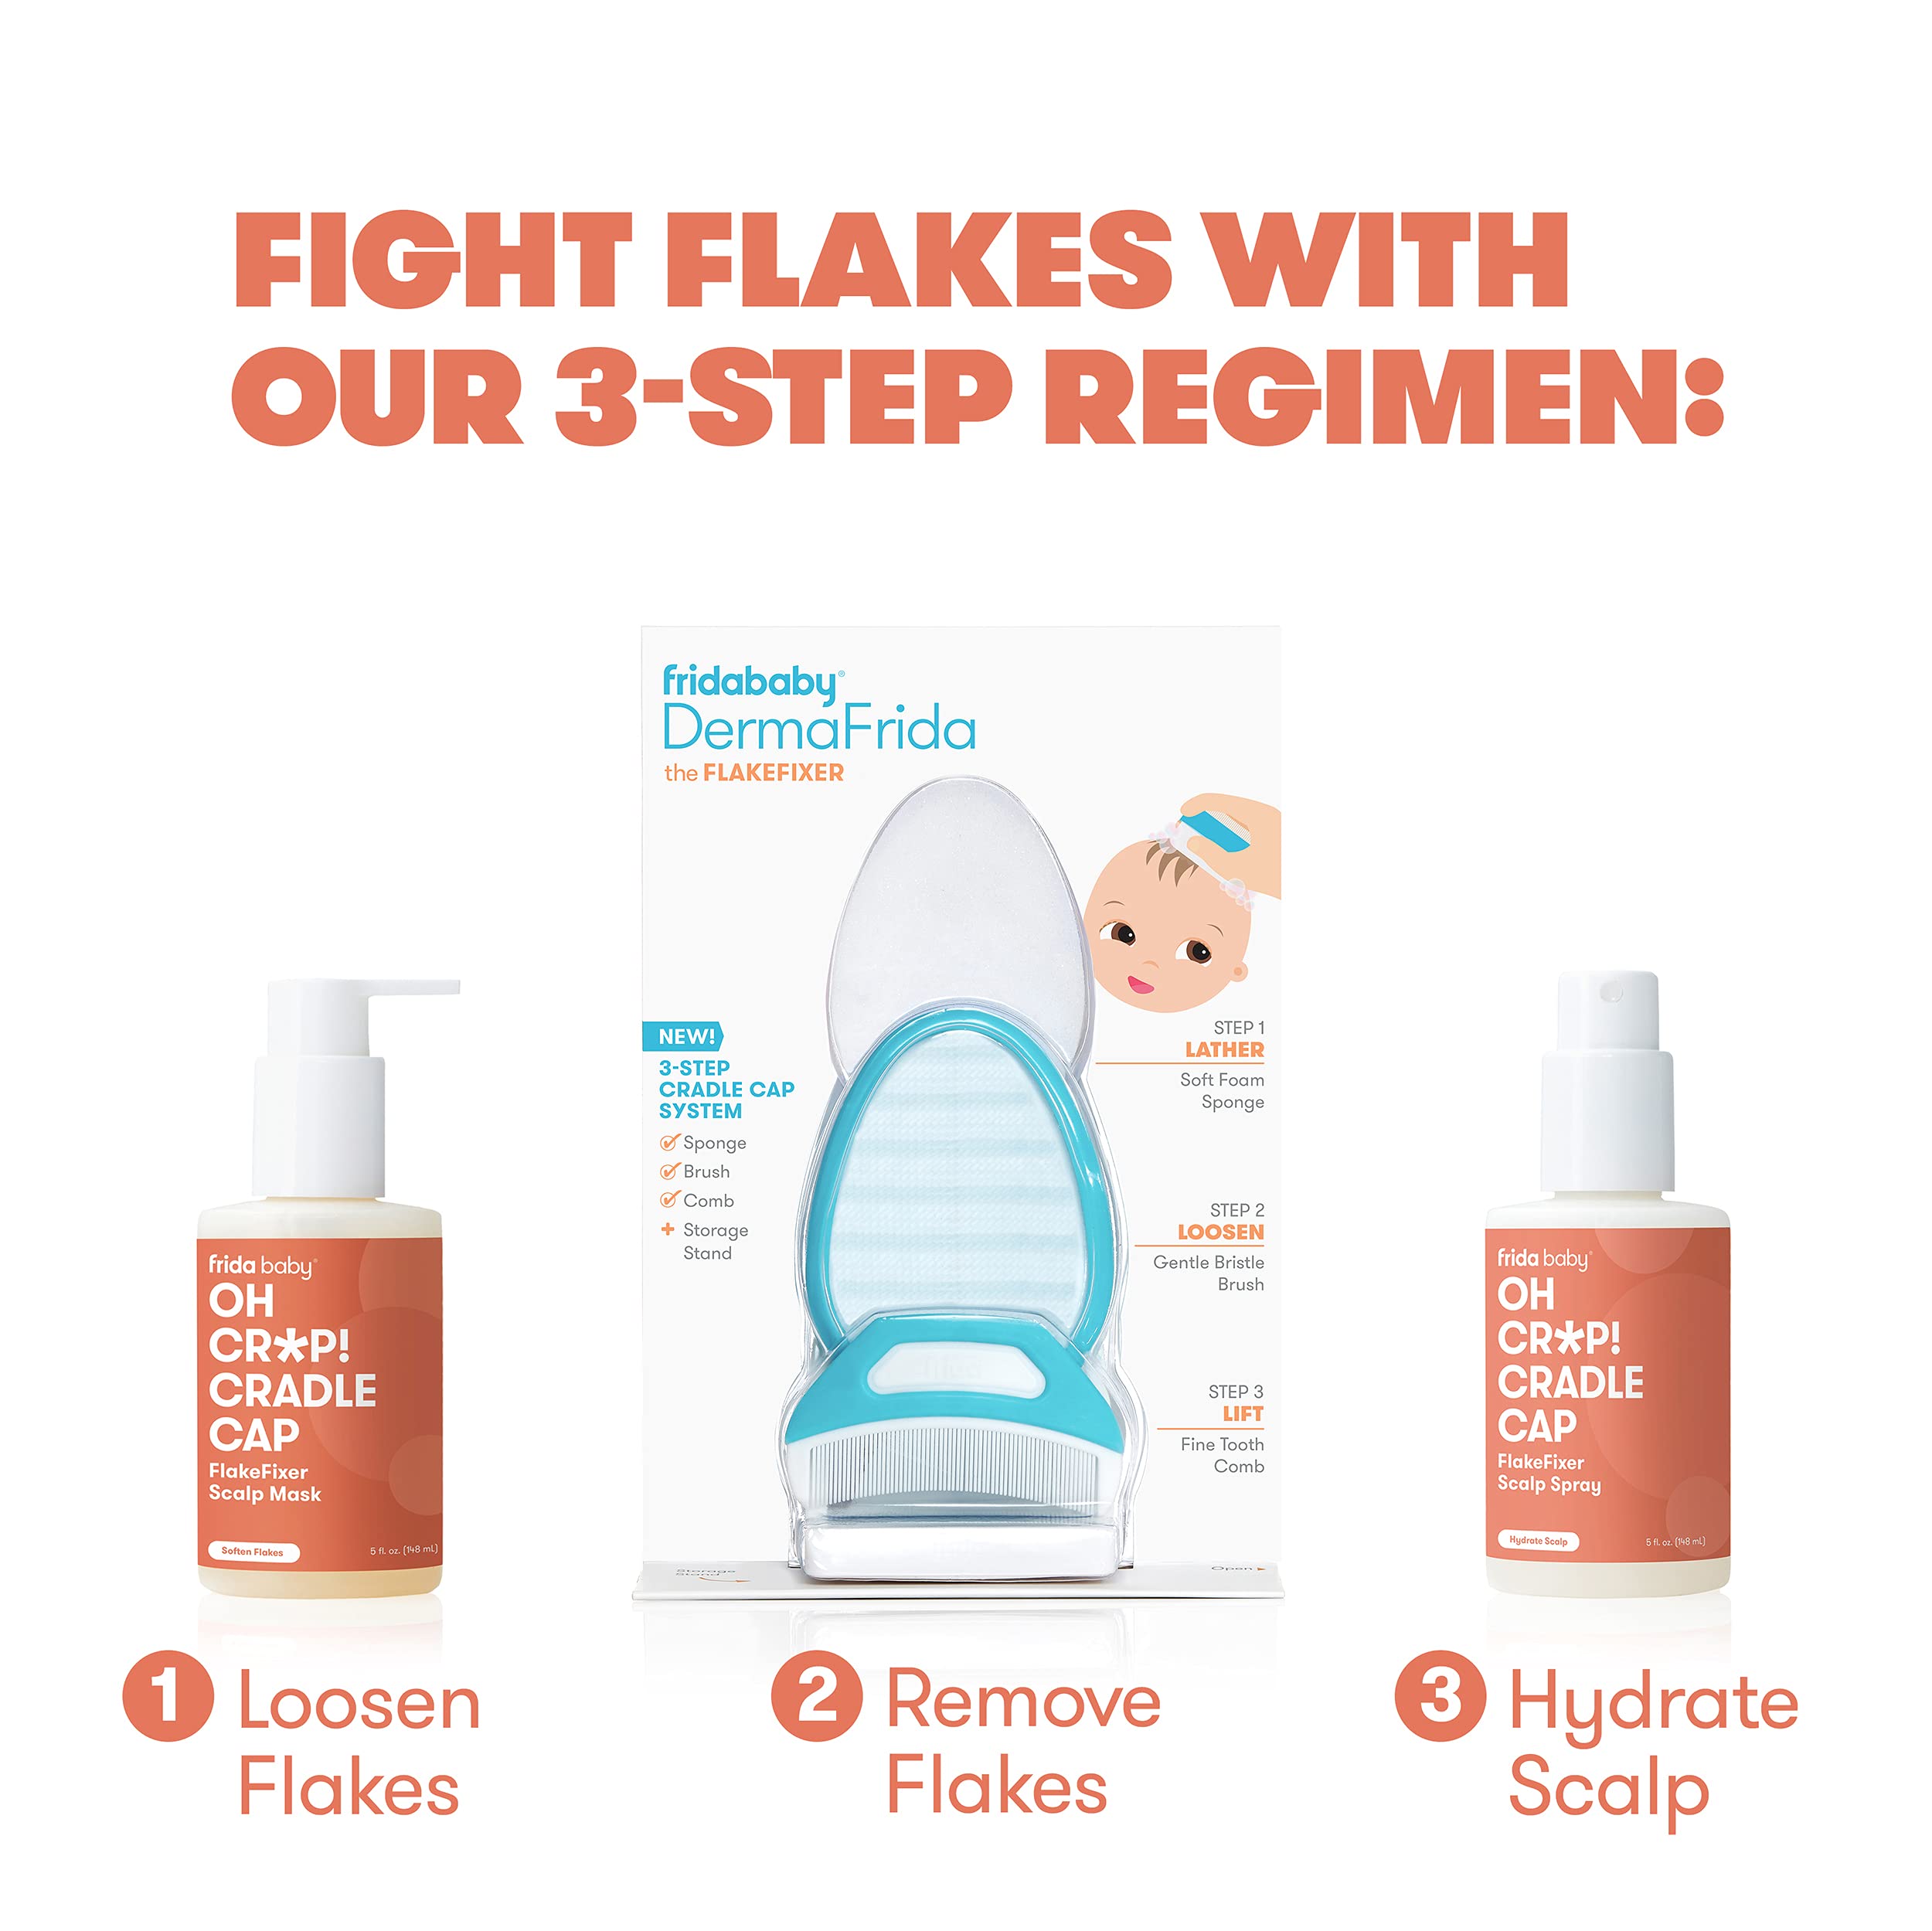 Frida Baby The 3-Step Cradle Cap System | DermaFrida The FlakeFixer | Sponge, Brush, Comb and Storage Stand for Babies with Cradle Cap